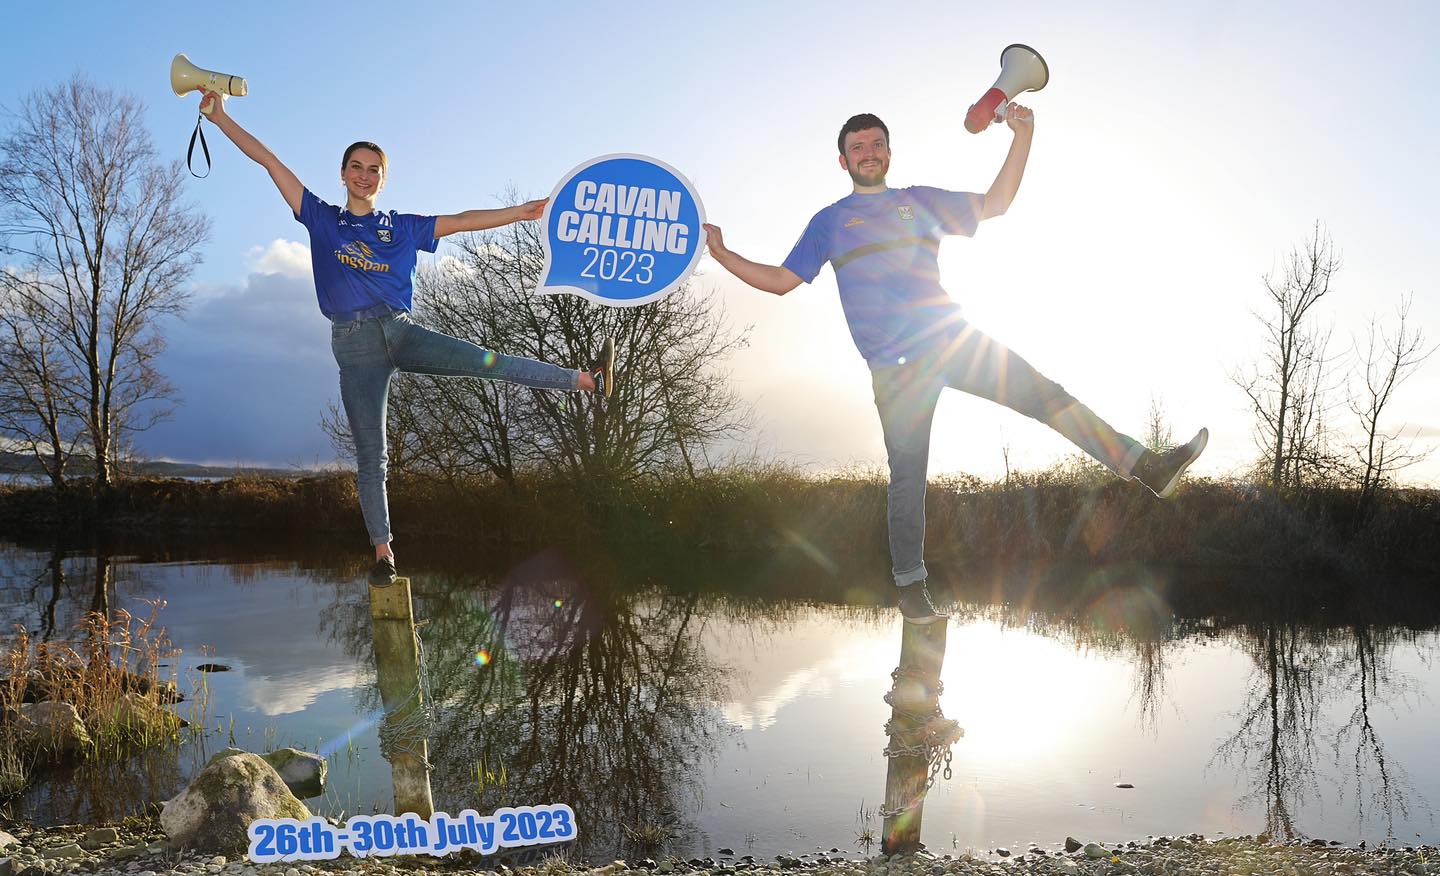 A man and a woman standing on a post in some water with the other leg and arms in the air holding between them a sign in blue and white with the event title on, set outside in the countryside with the sun shining behind them.